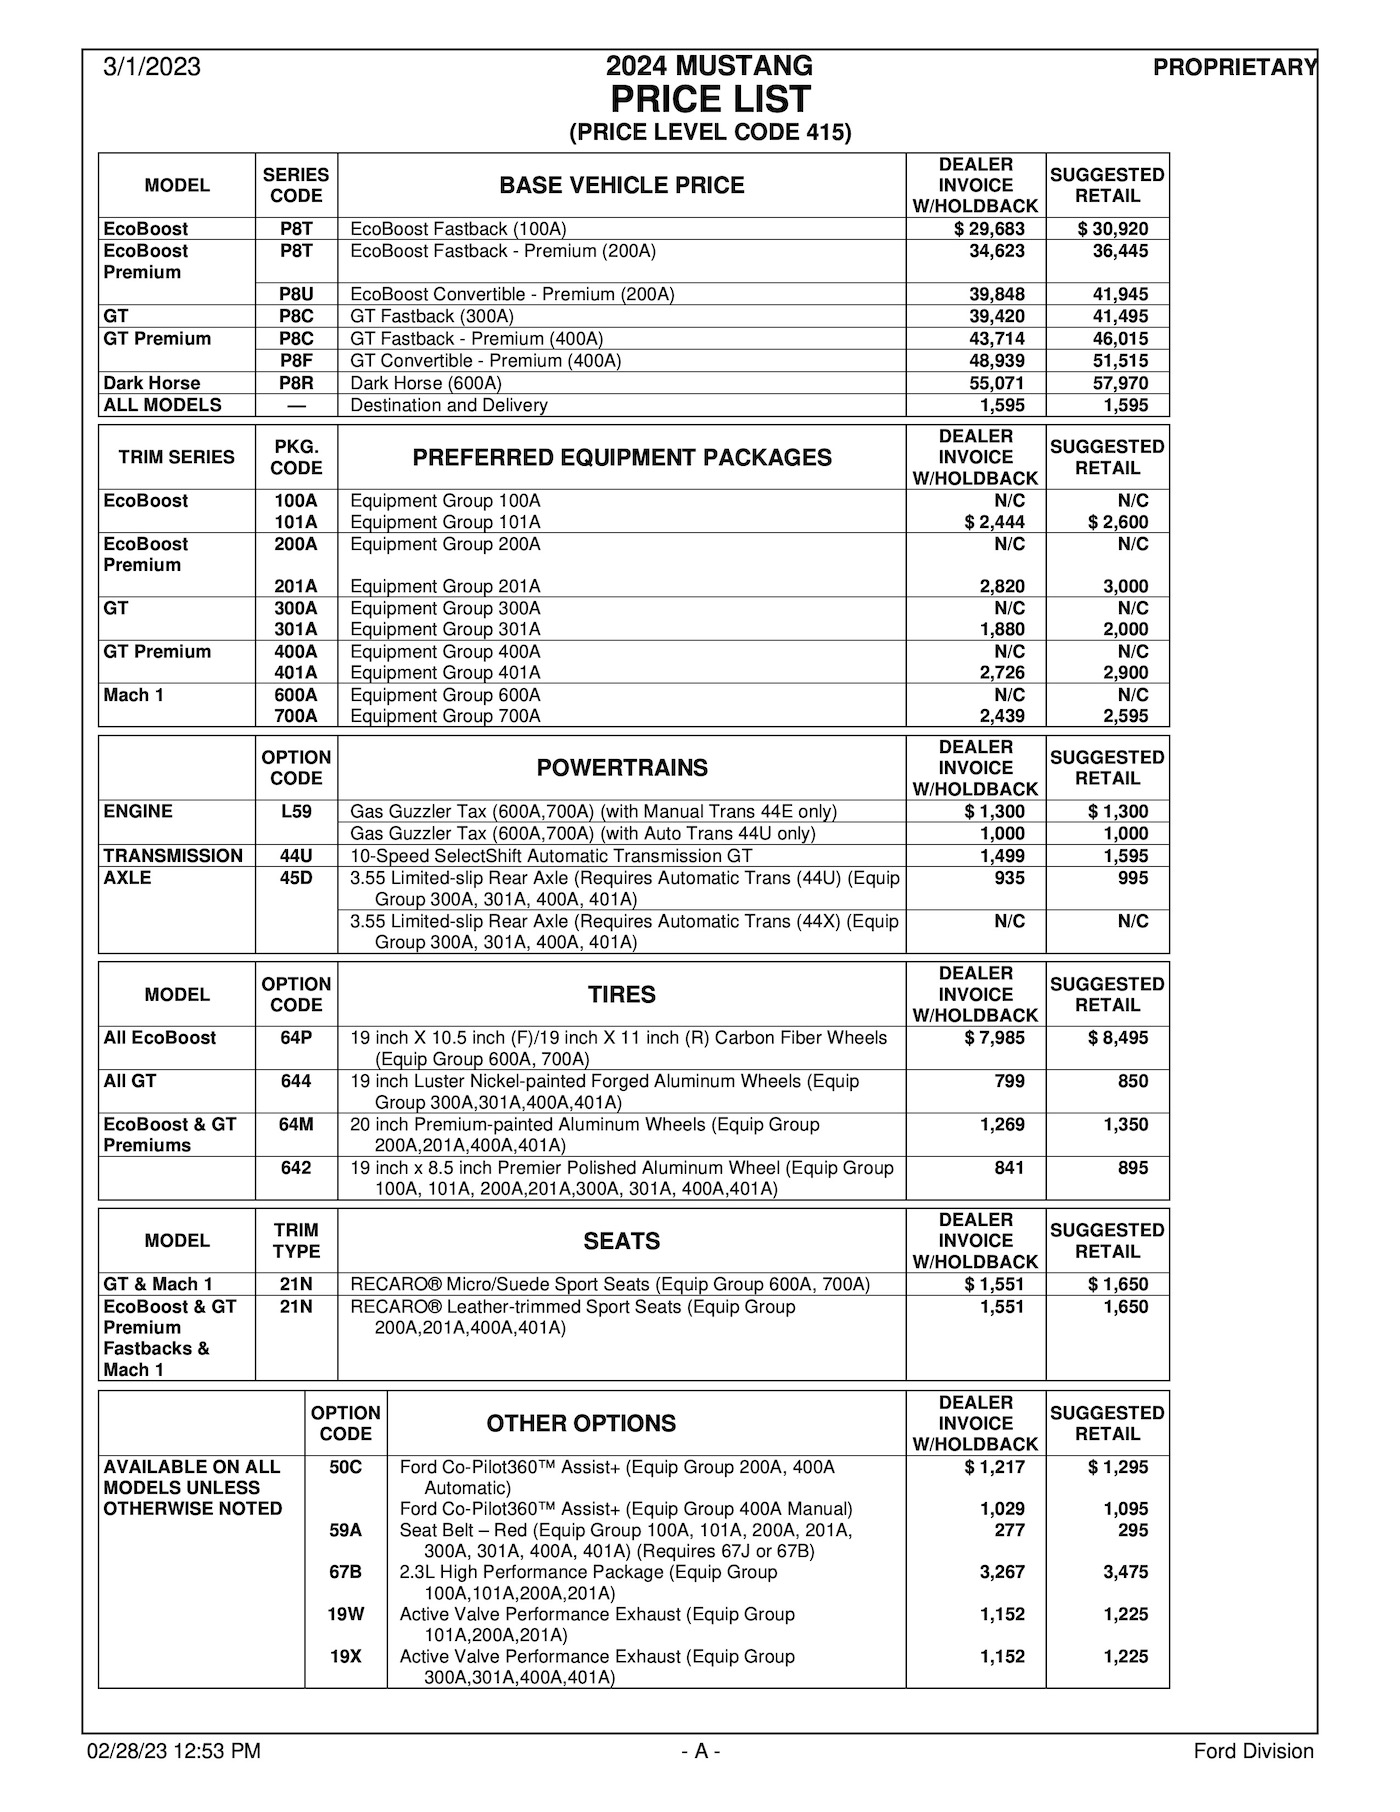 S650 Mustang Latest 2024 Mustang Order Guide and Price List (w/ MSRP & Invoice)! 2024MY Mustang PL415 Price List-1